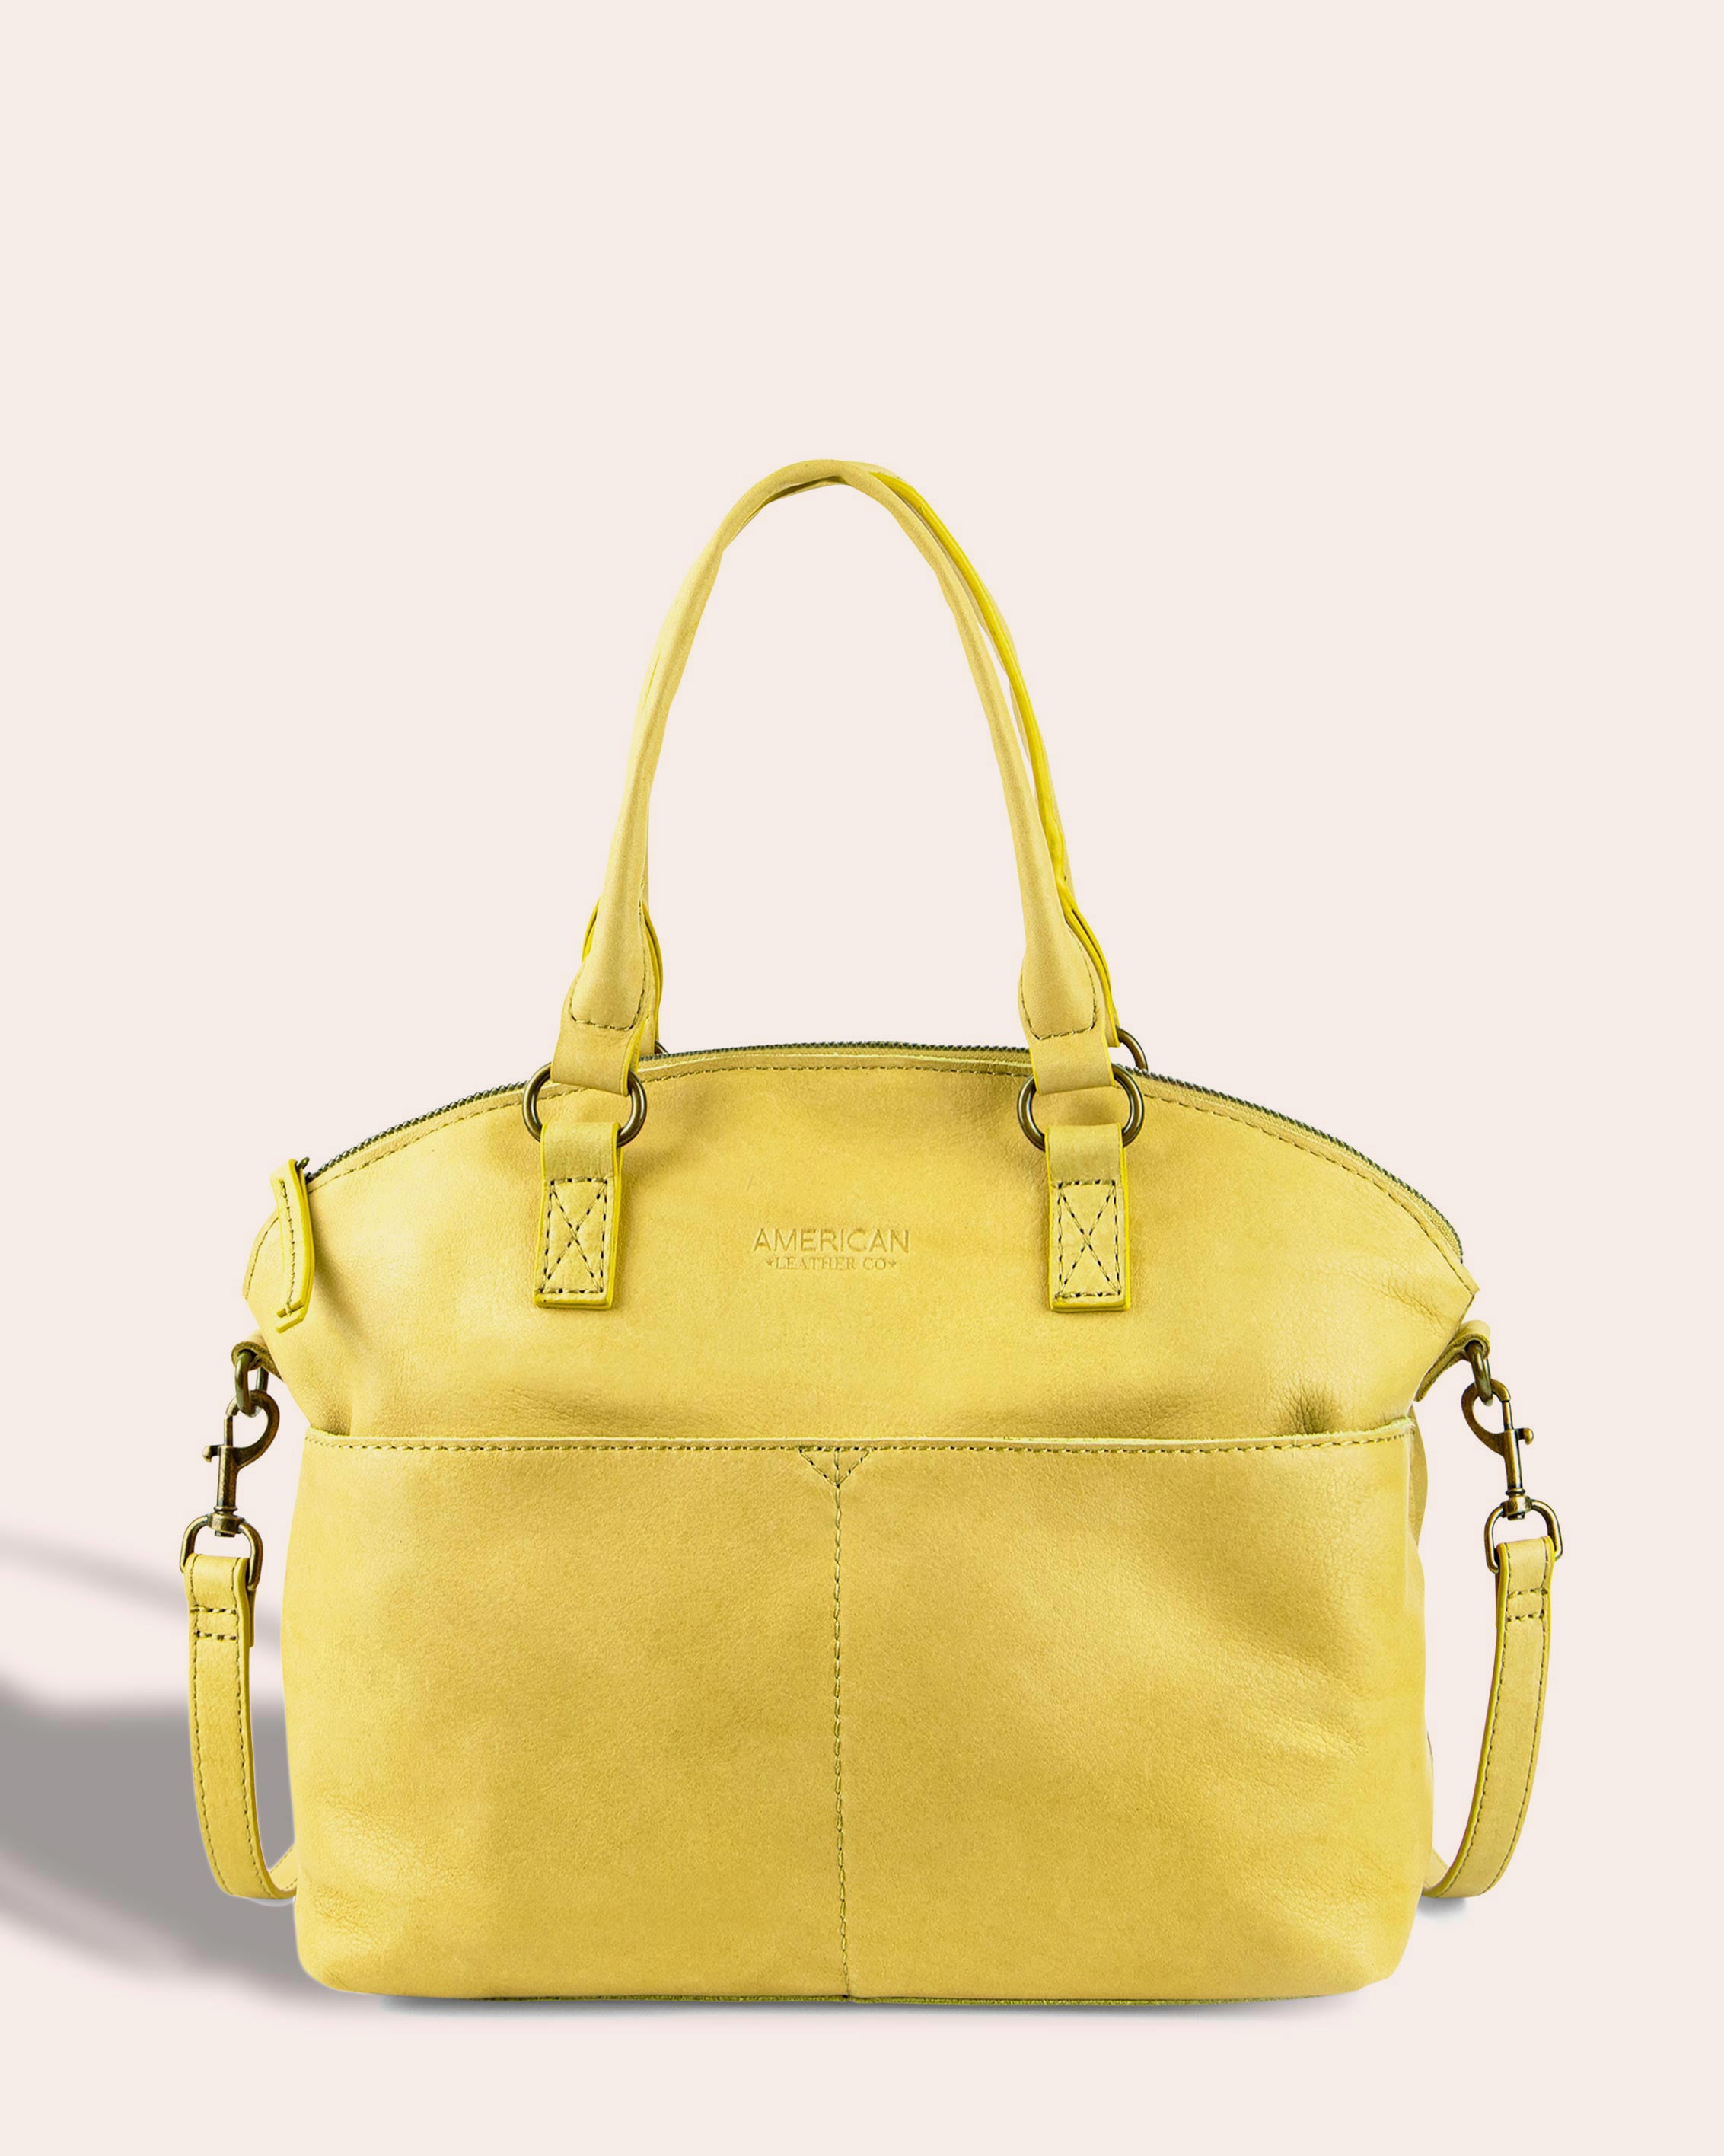 American Leather Co. Carrie Dome Satchel Pale Yellow